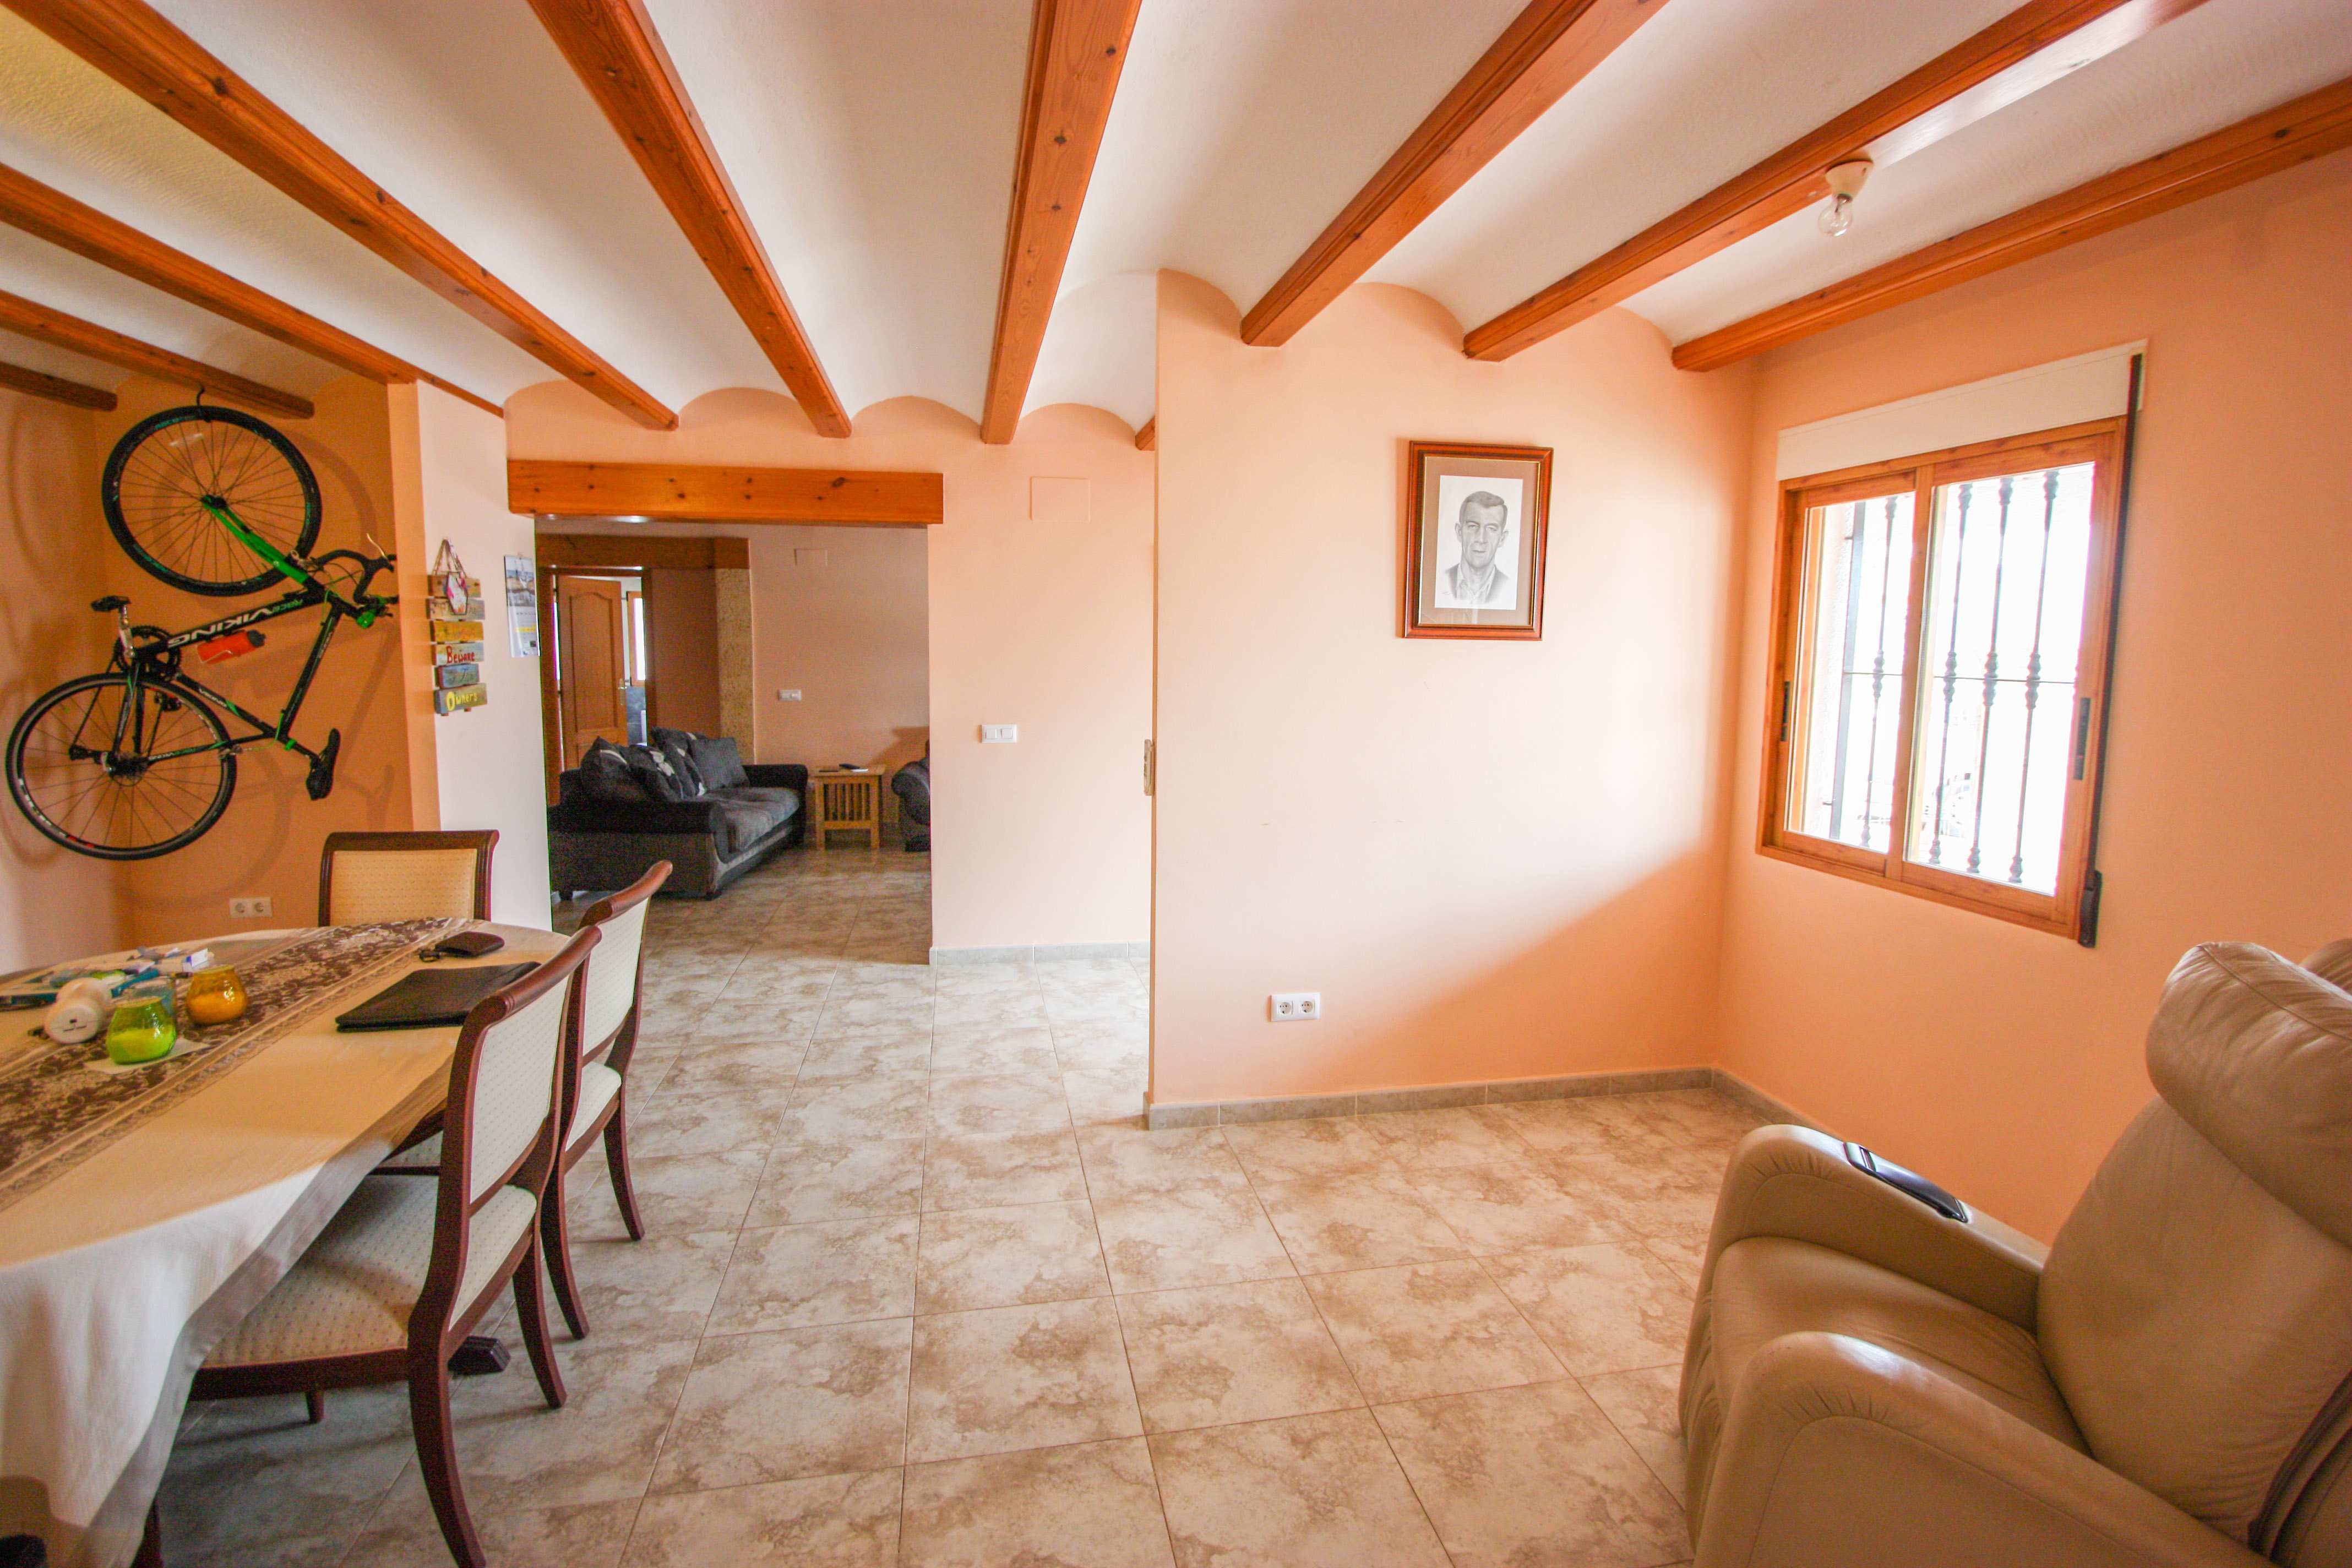 For Sale. Apartment in Orba Valley